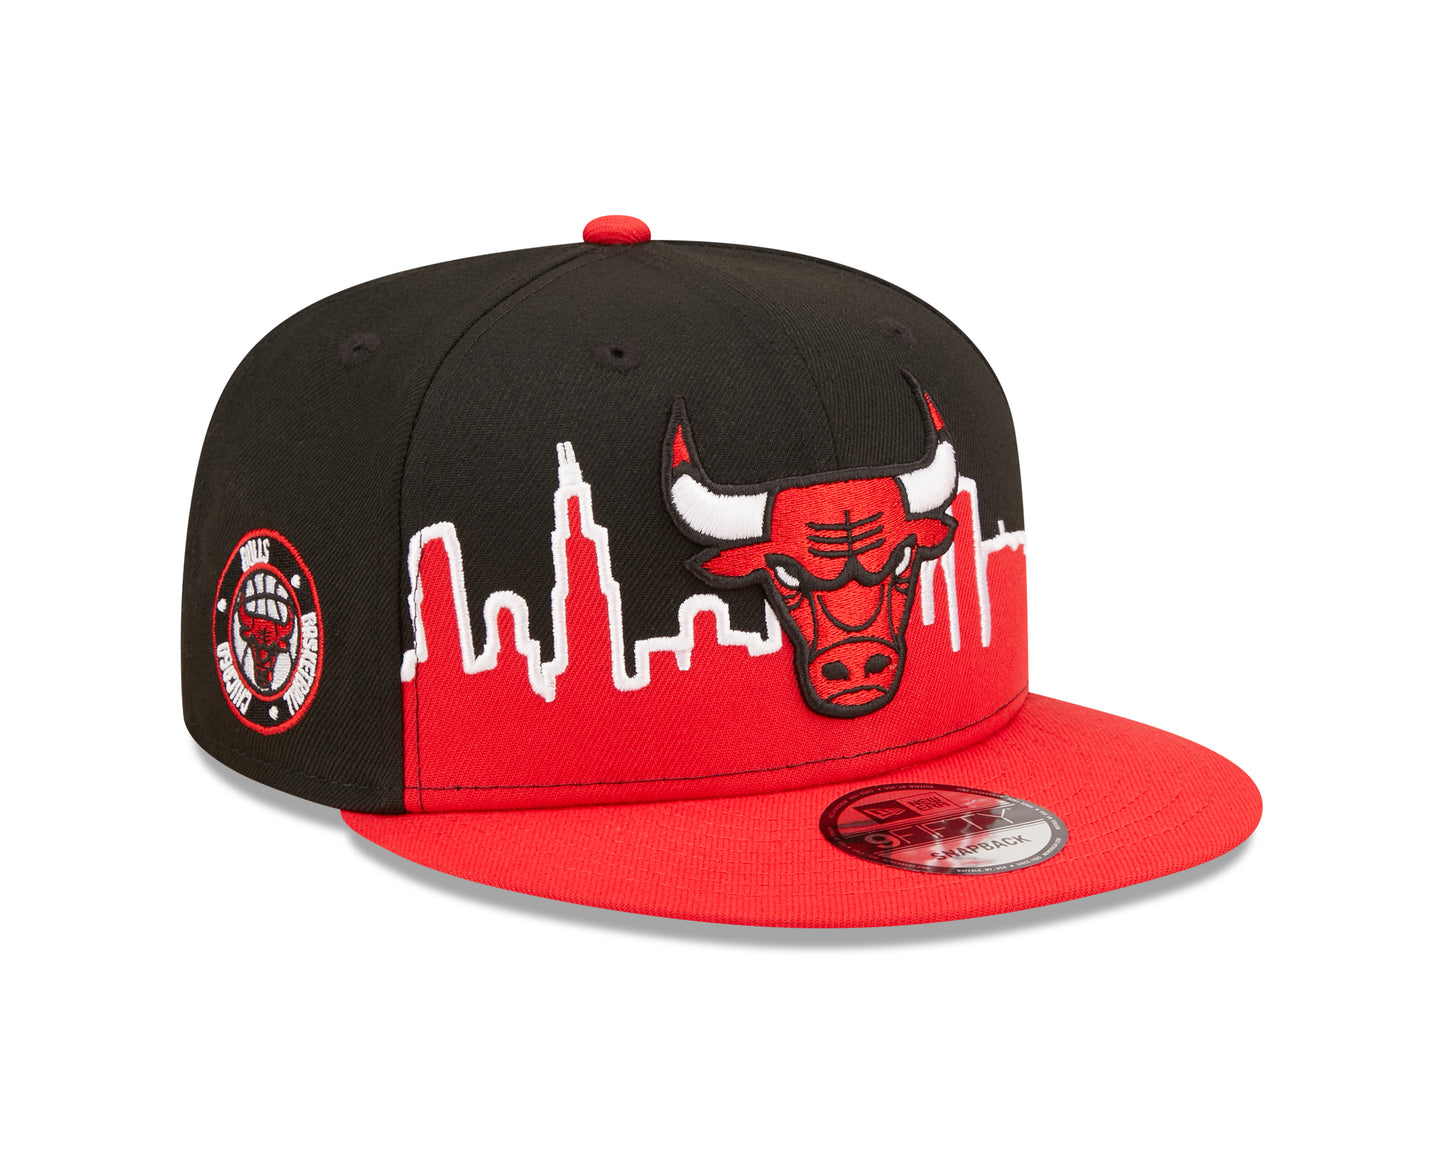 Chicago Bulls New Era Tip-Off 9FIFTY Snap Back Hat - Red/Black